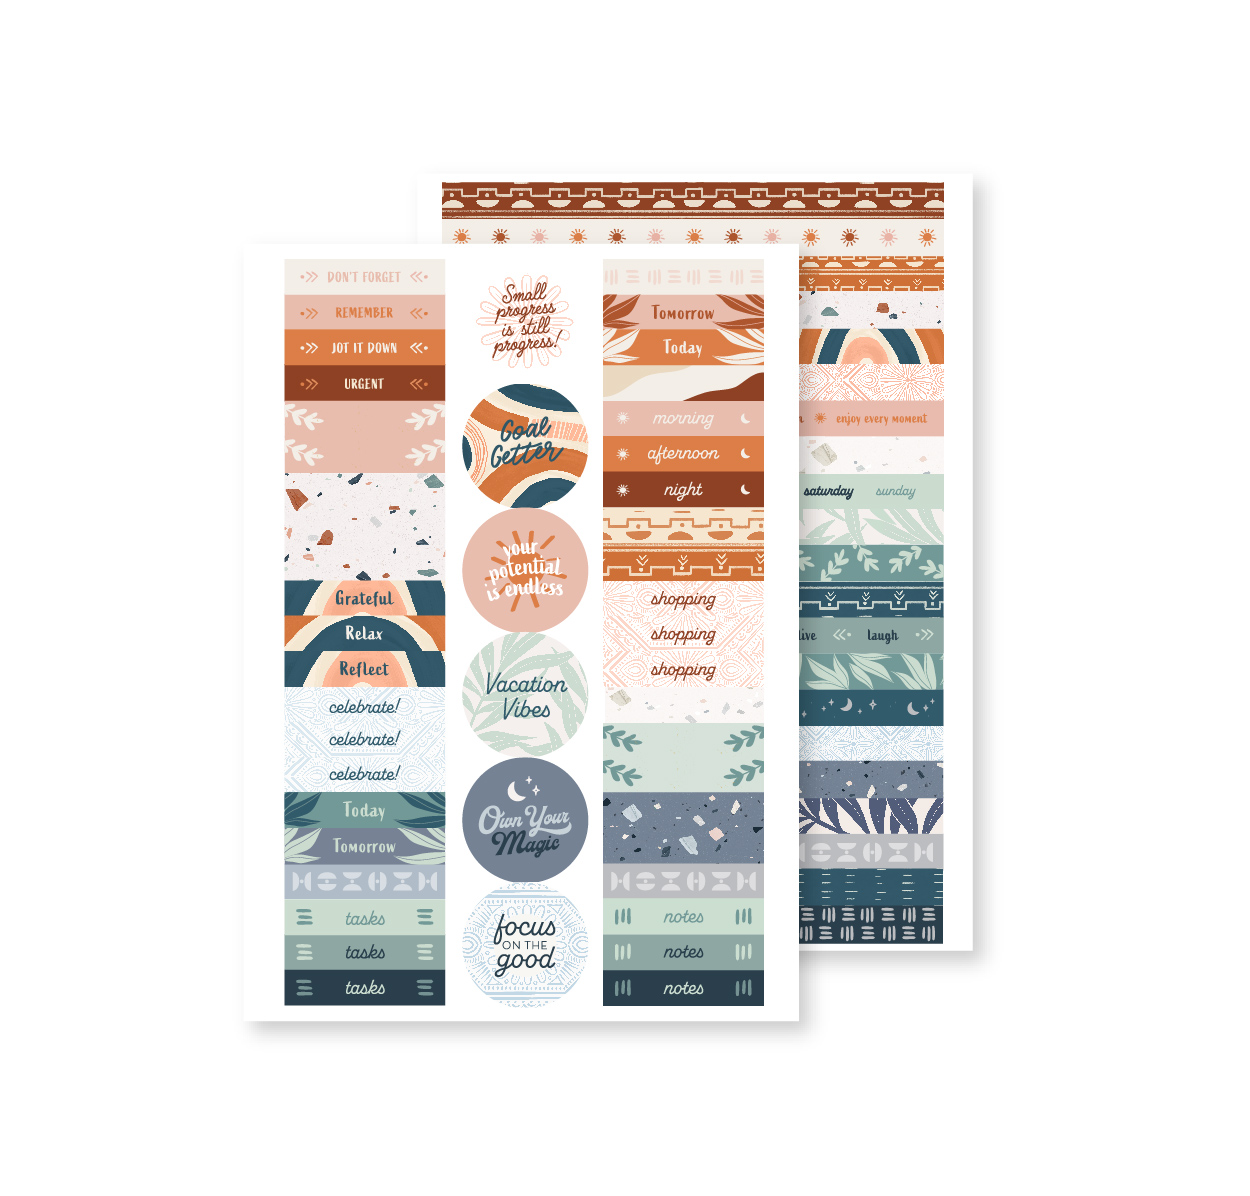 336 Appointment Time Stickers for Erin Condren Life Planner, Plum Paper or  Mambi Happy Planner || R5403